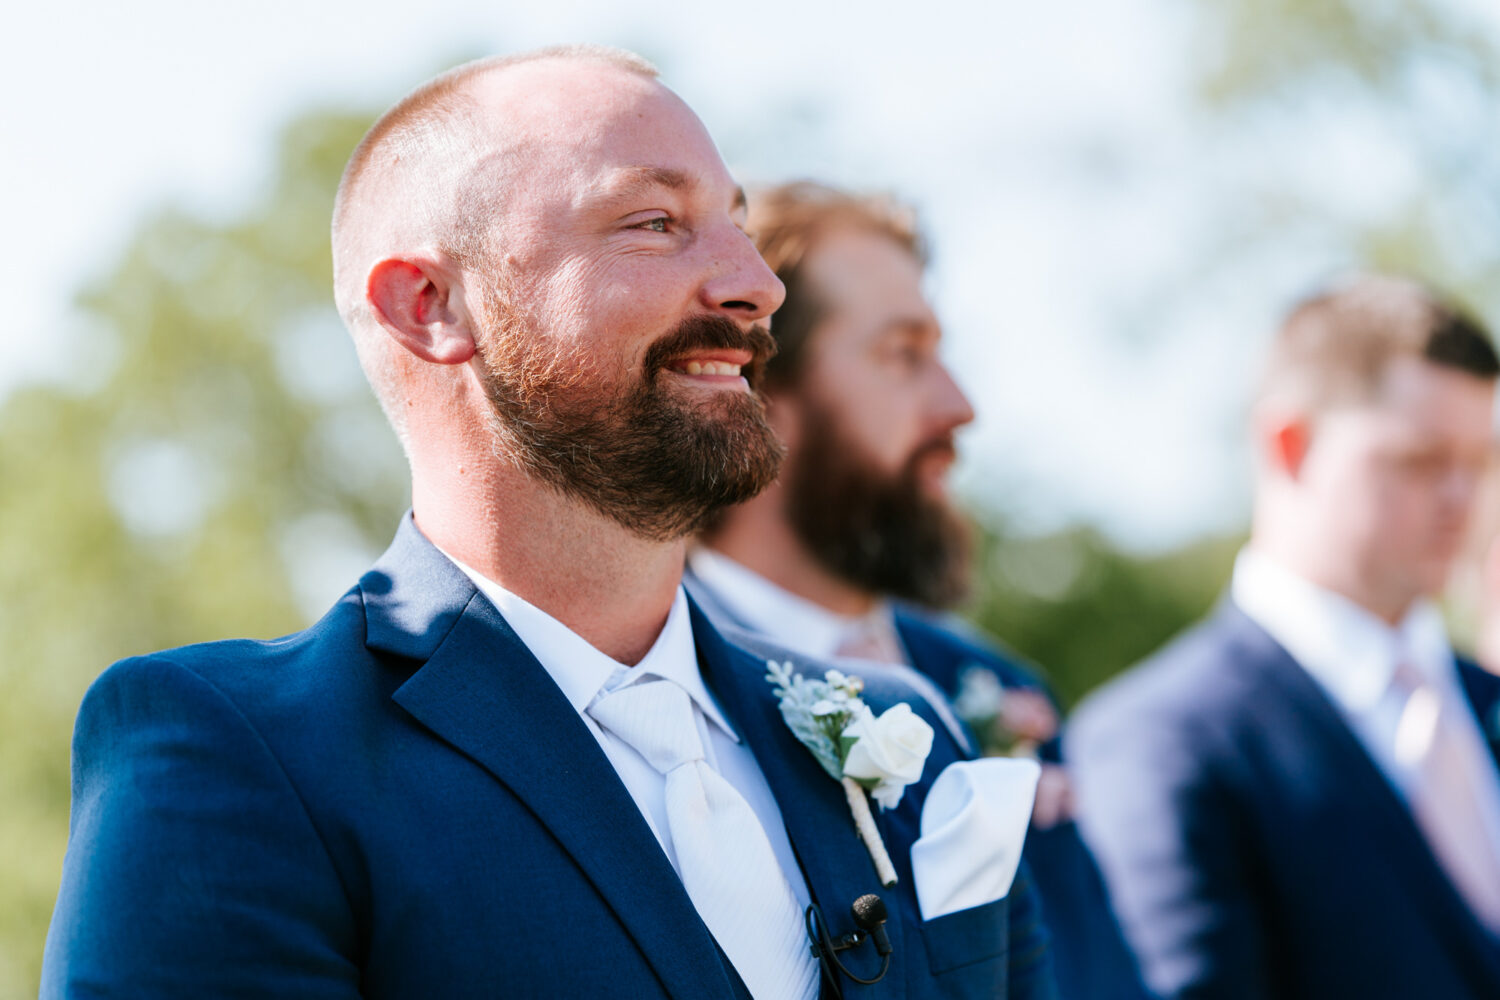 groom reacting to seeing bride for the first time on their wedding day